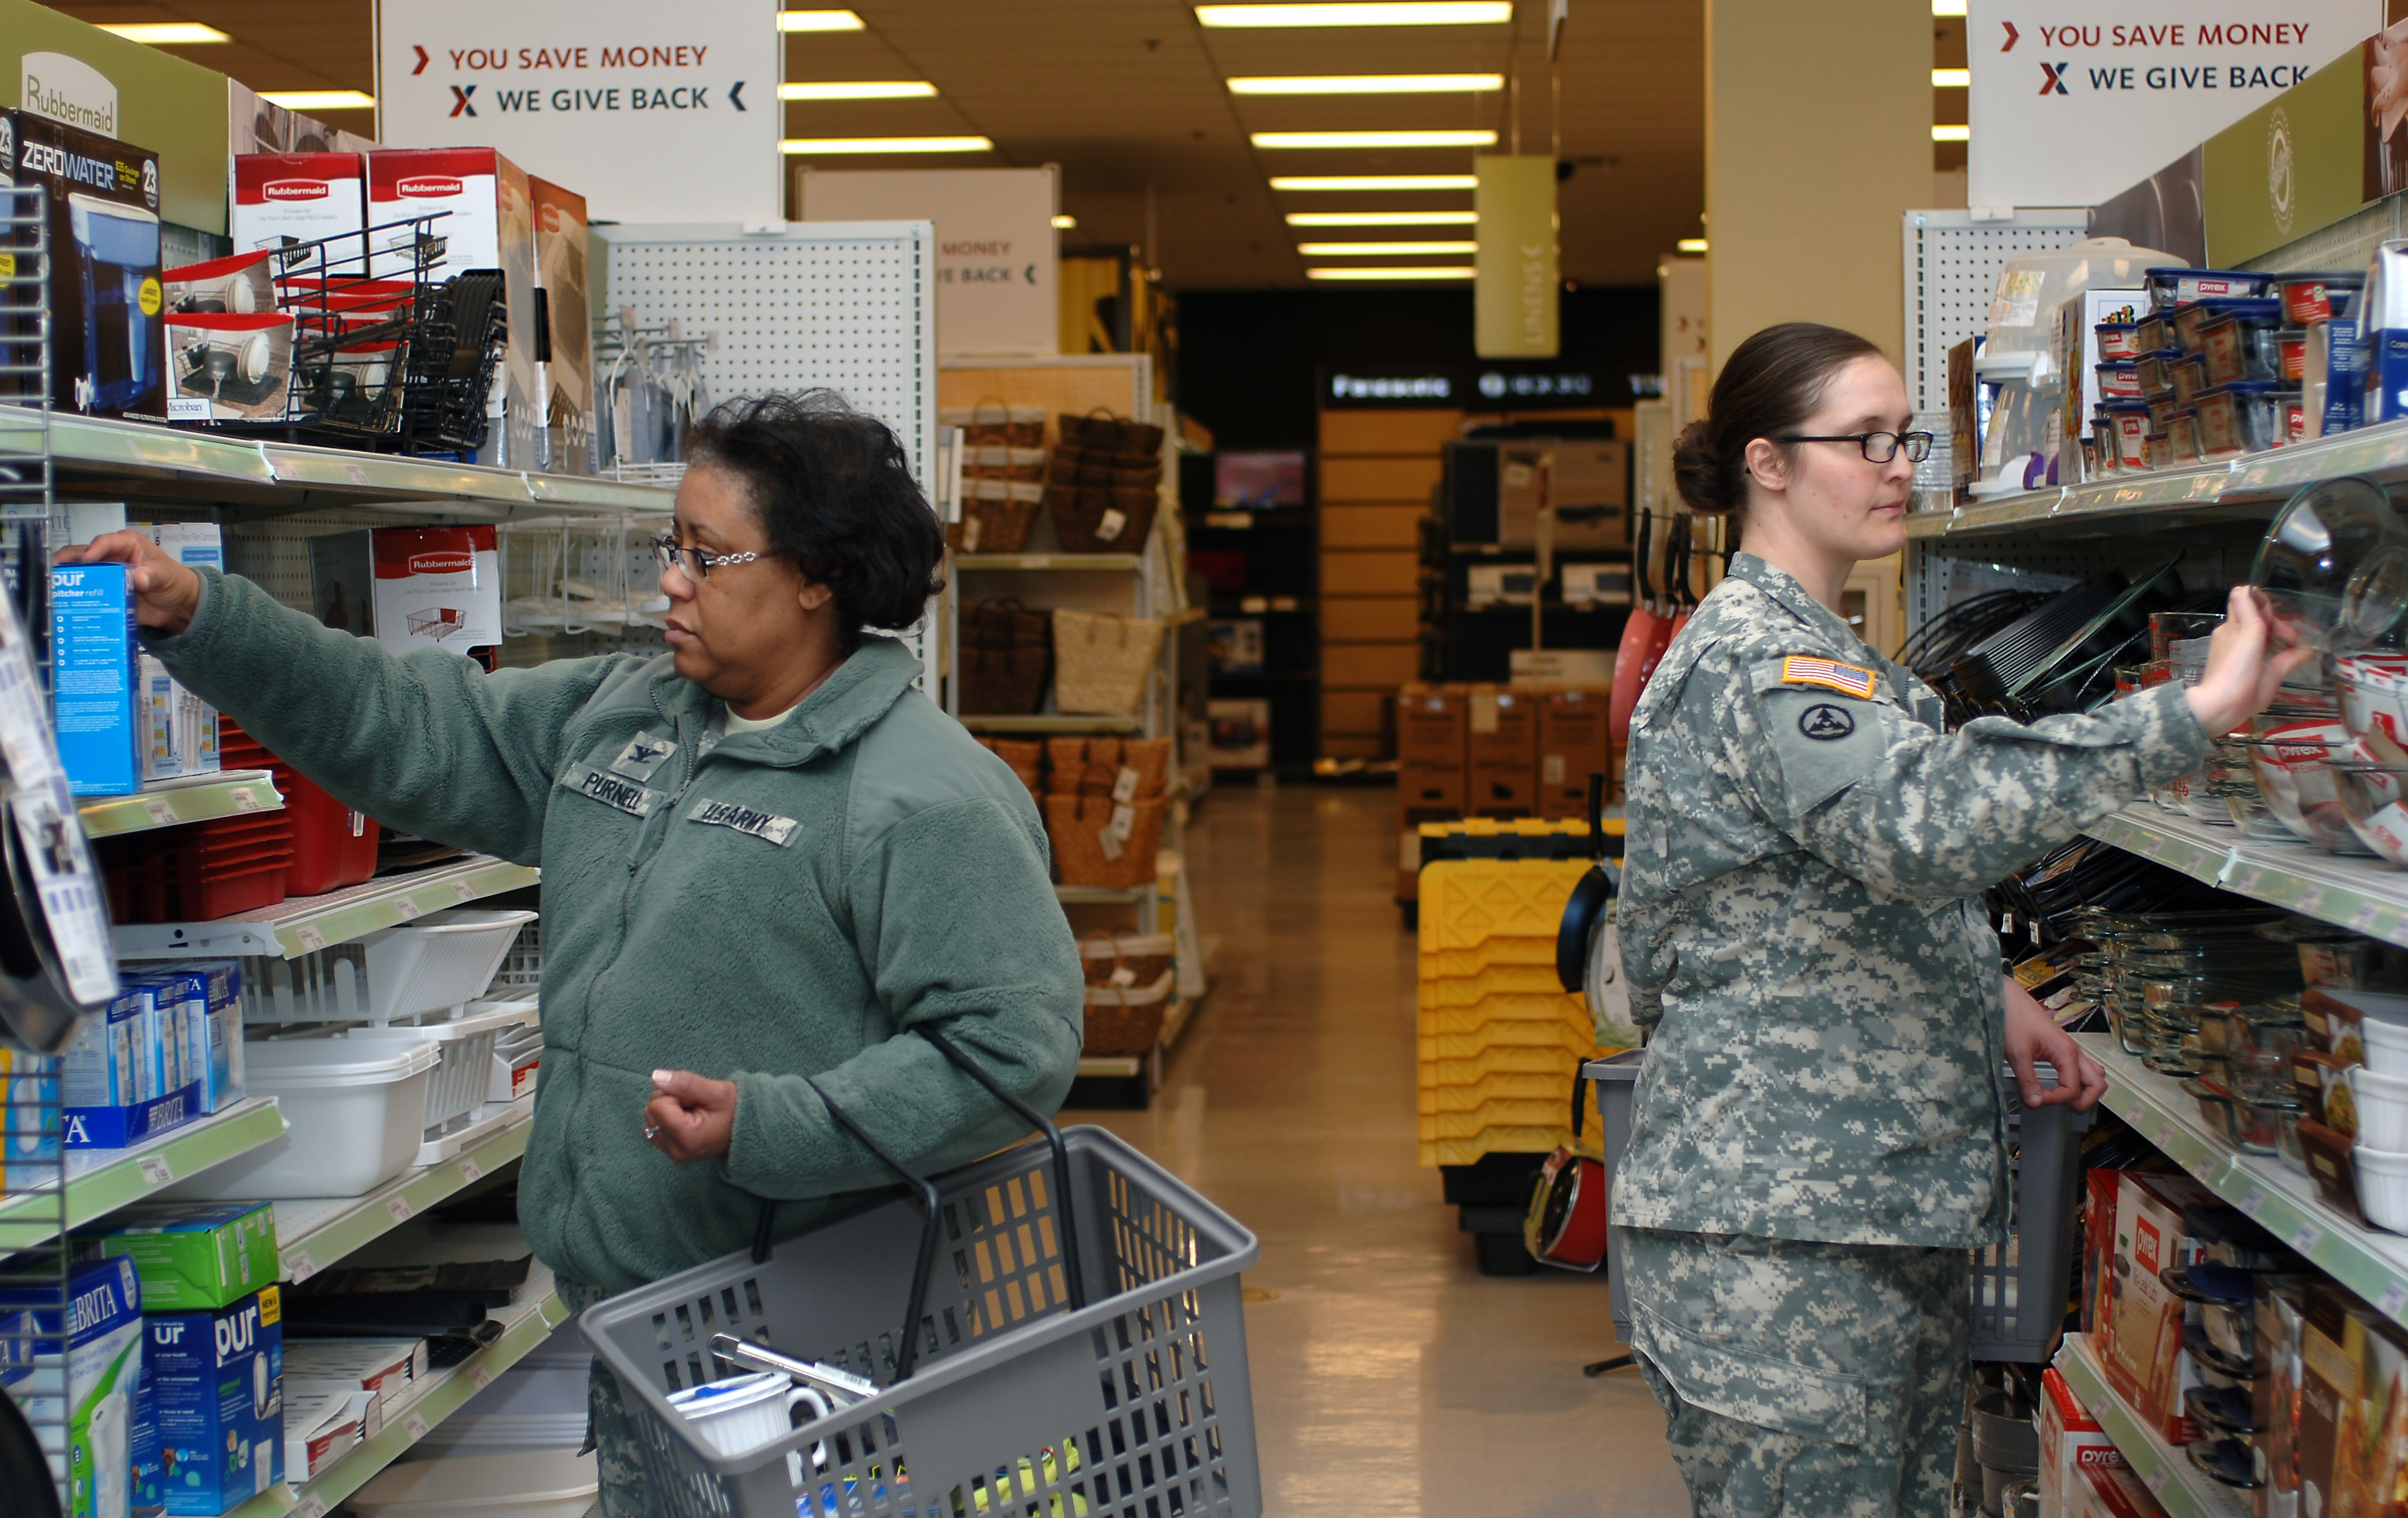 Changes at AAFES aimed at improved shopping experience